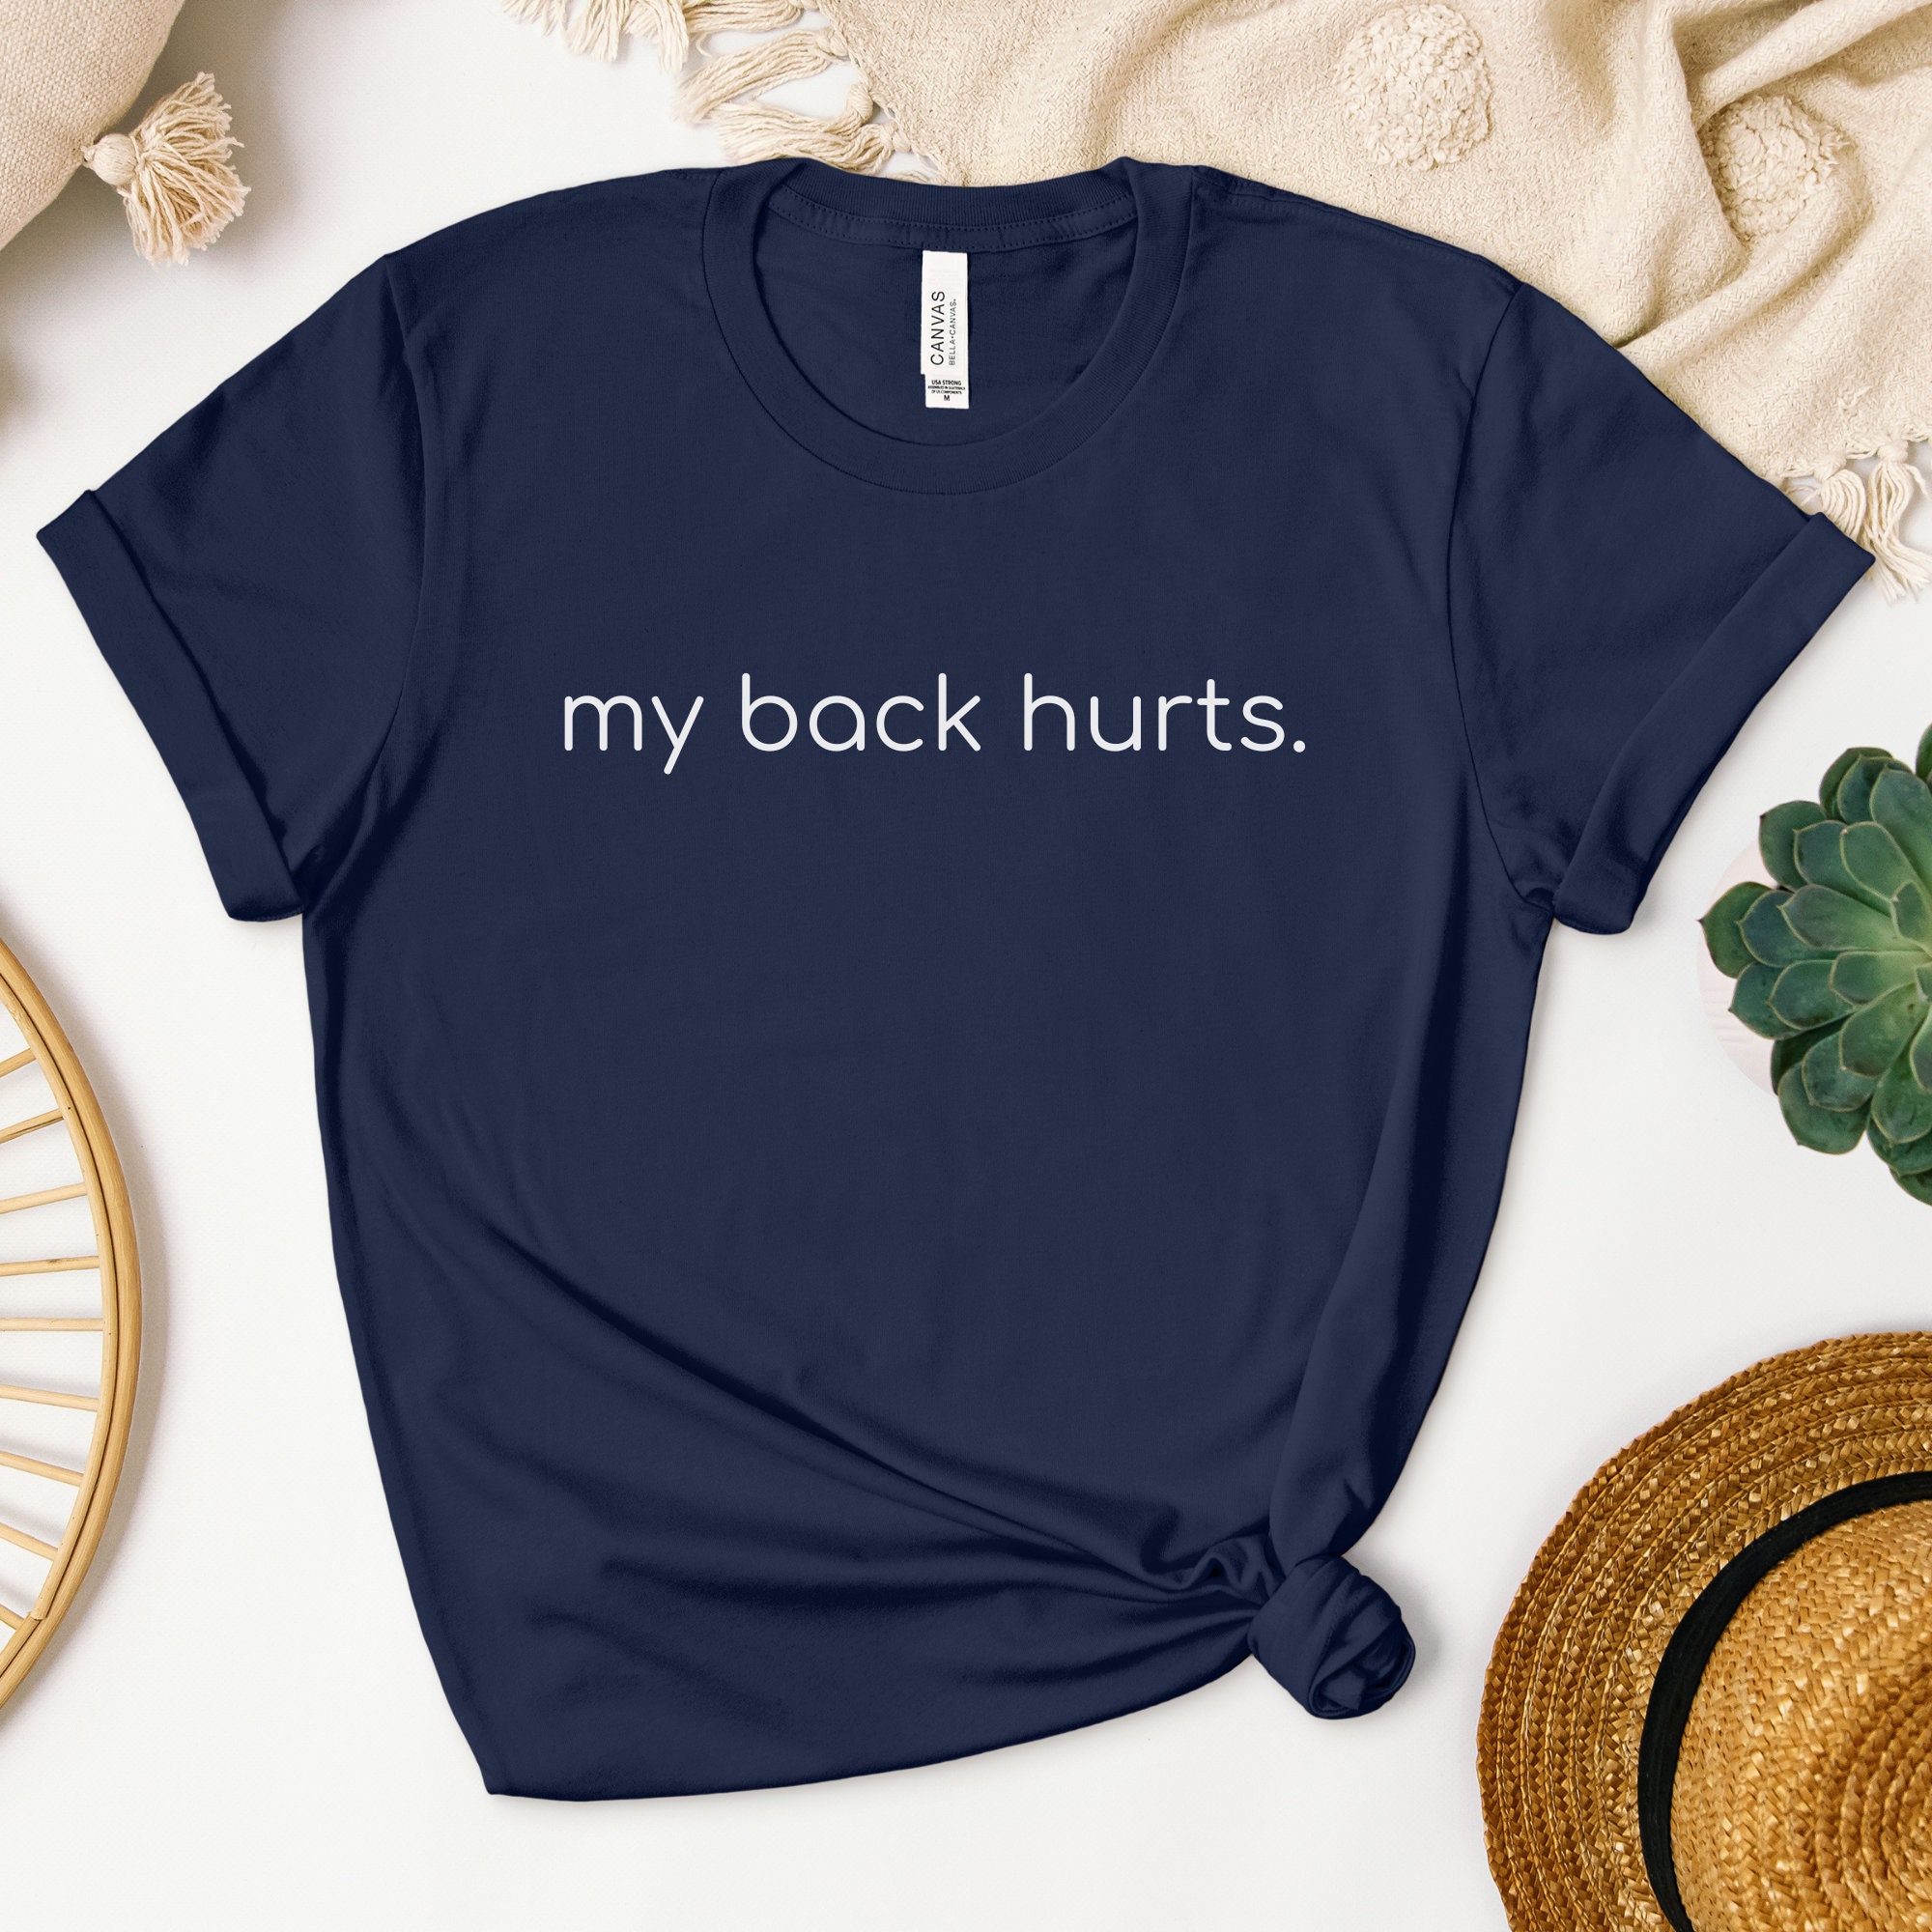 10 Gifts to Get Someone with Back Pain